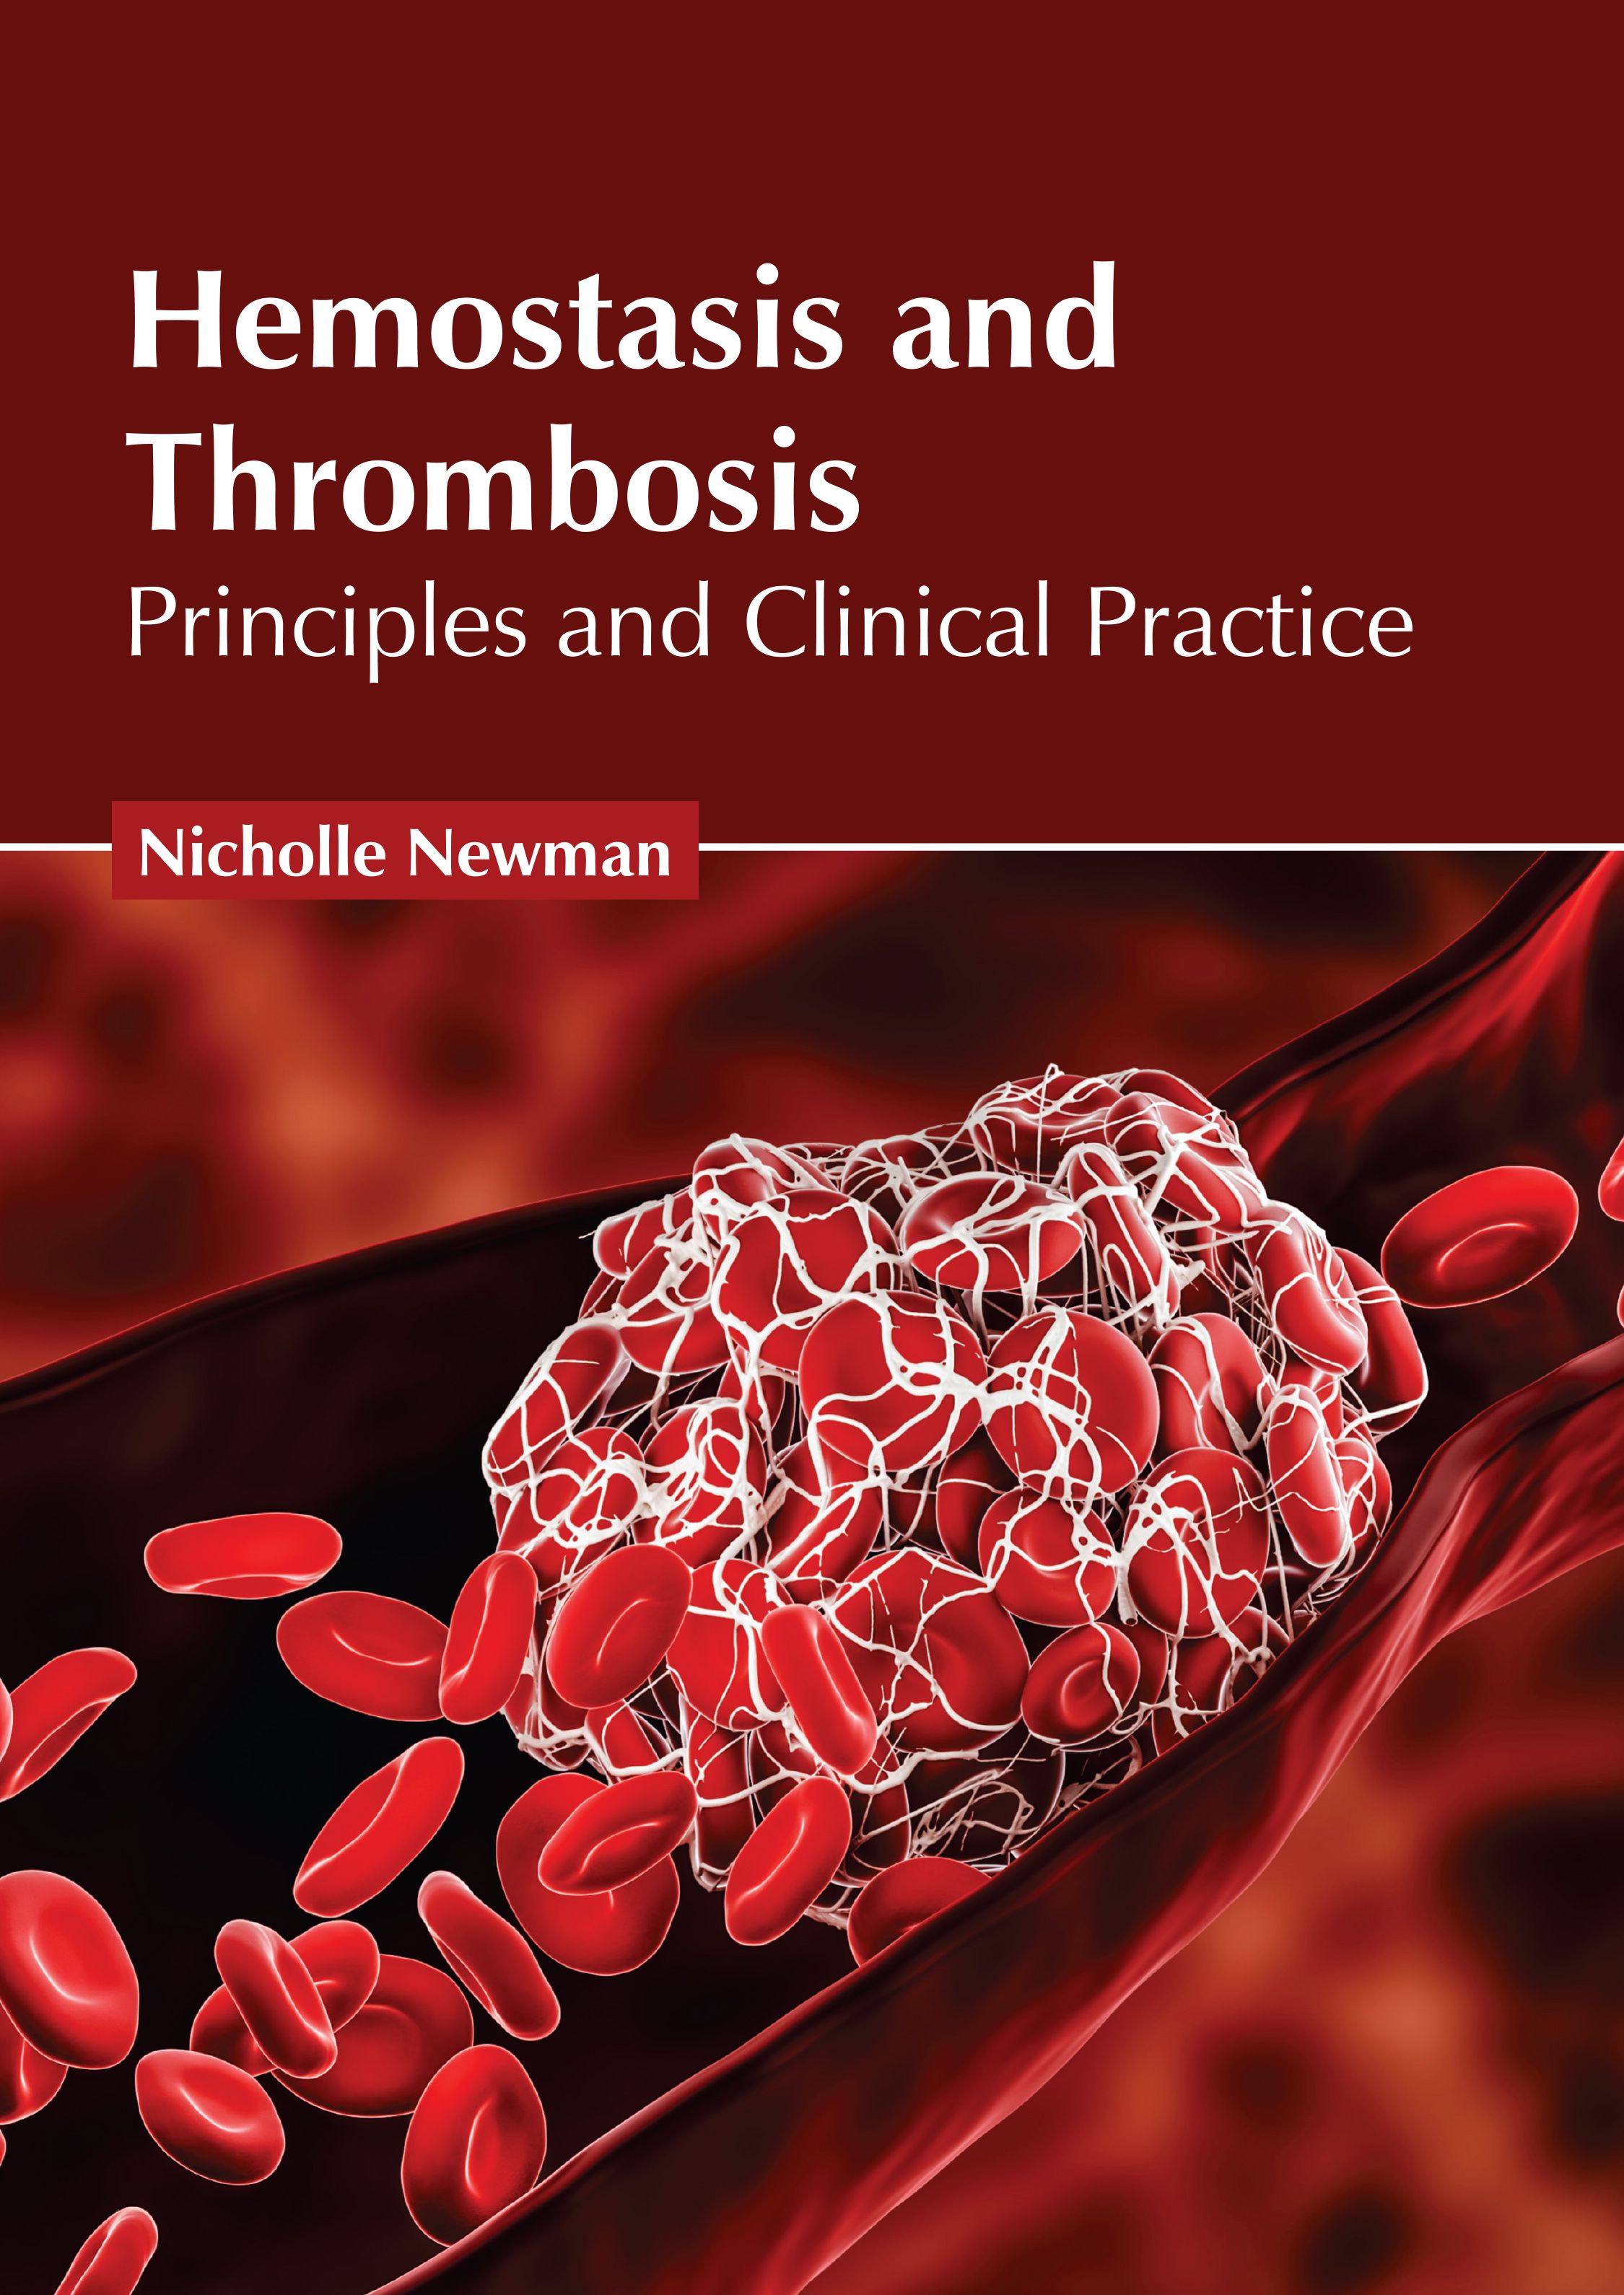 HEMOSTASIS AND THROMBOSIS: PRINCIPLES AND CLINICAL PRACTICE